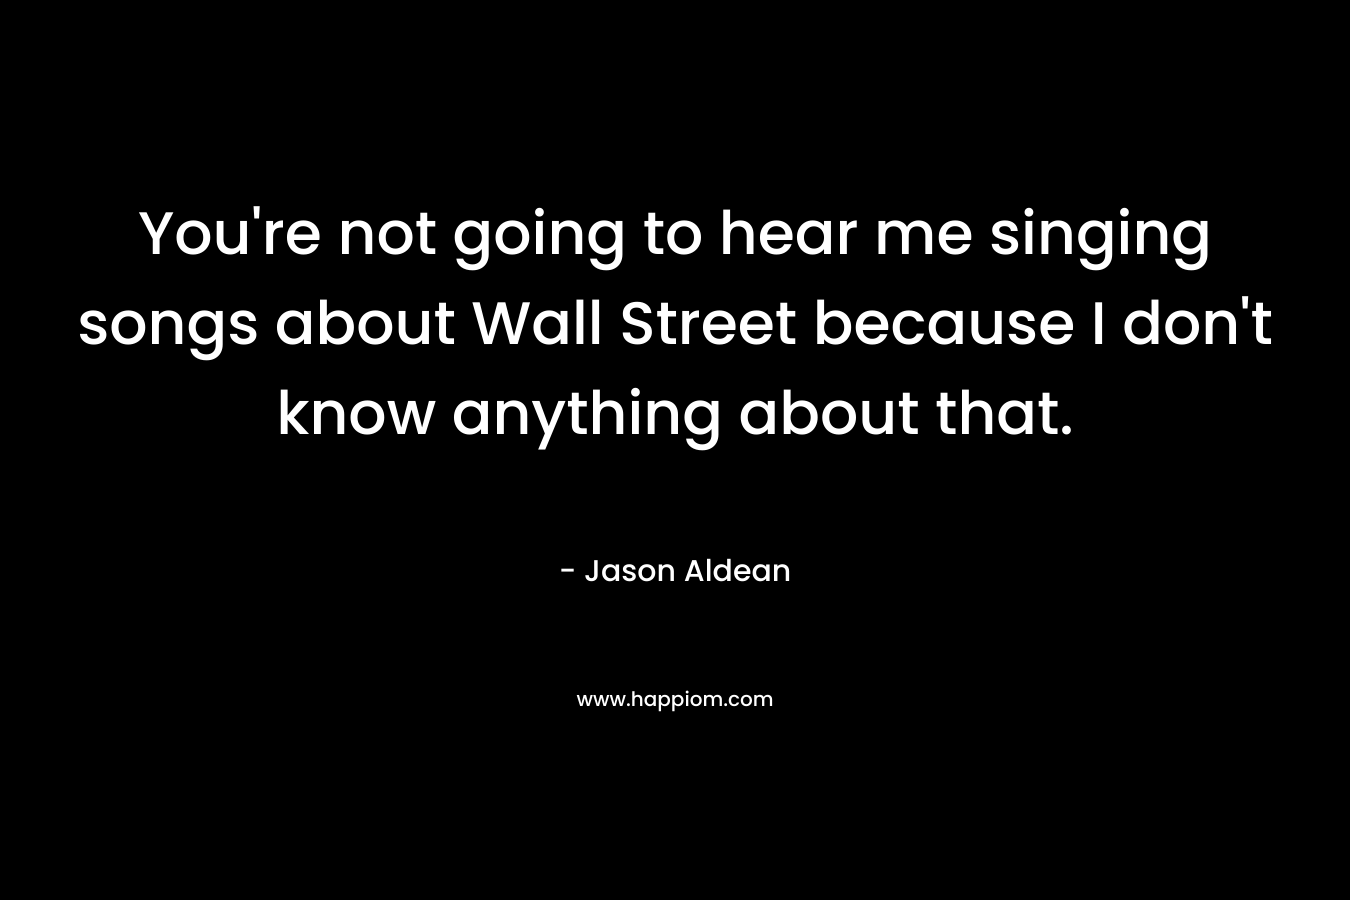 You're not going to hear me singing songs about Wall Street because I don't know anything about that.